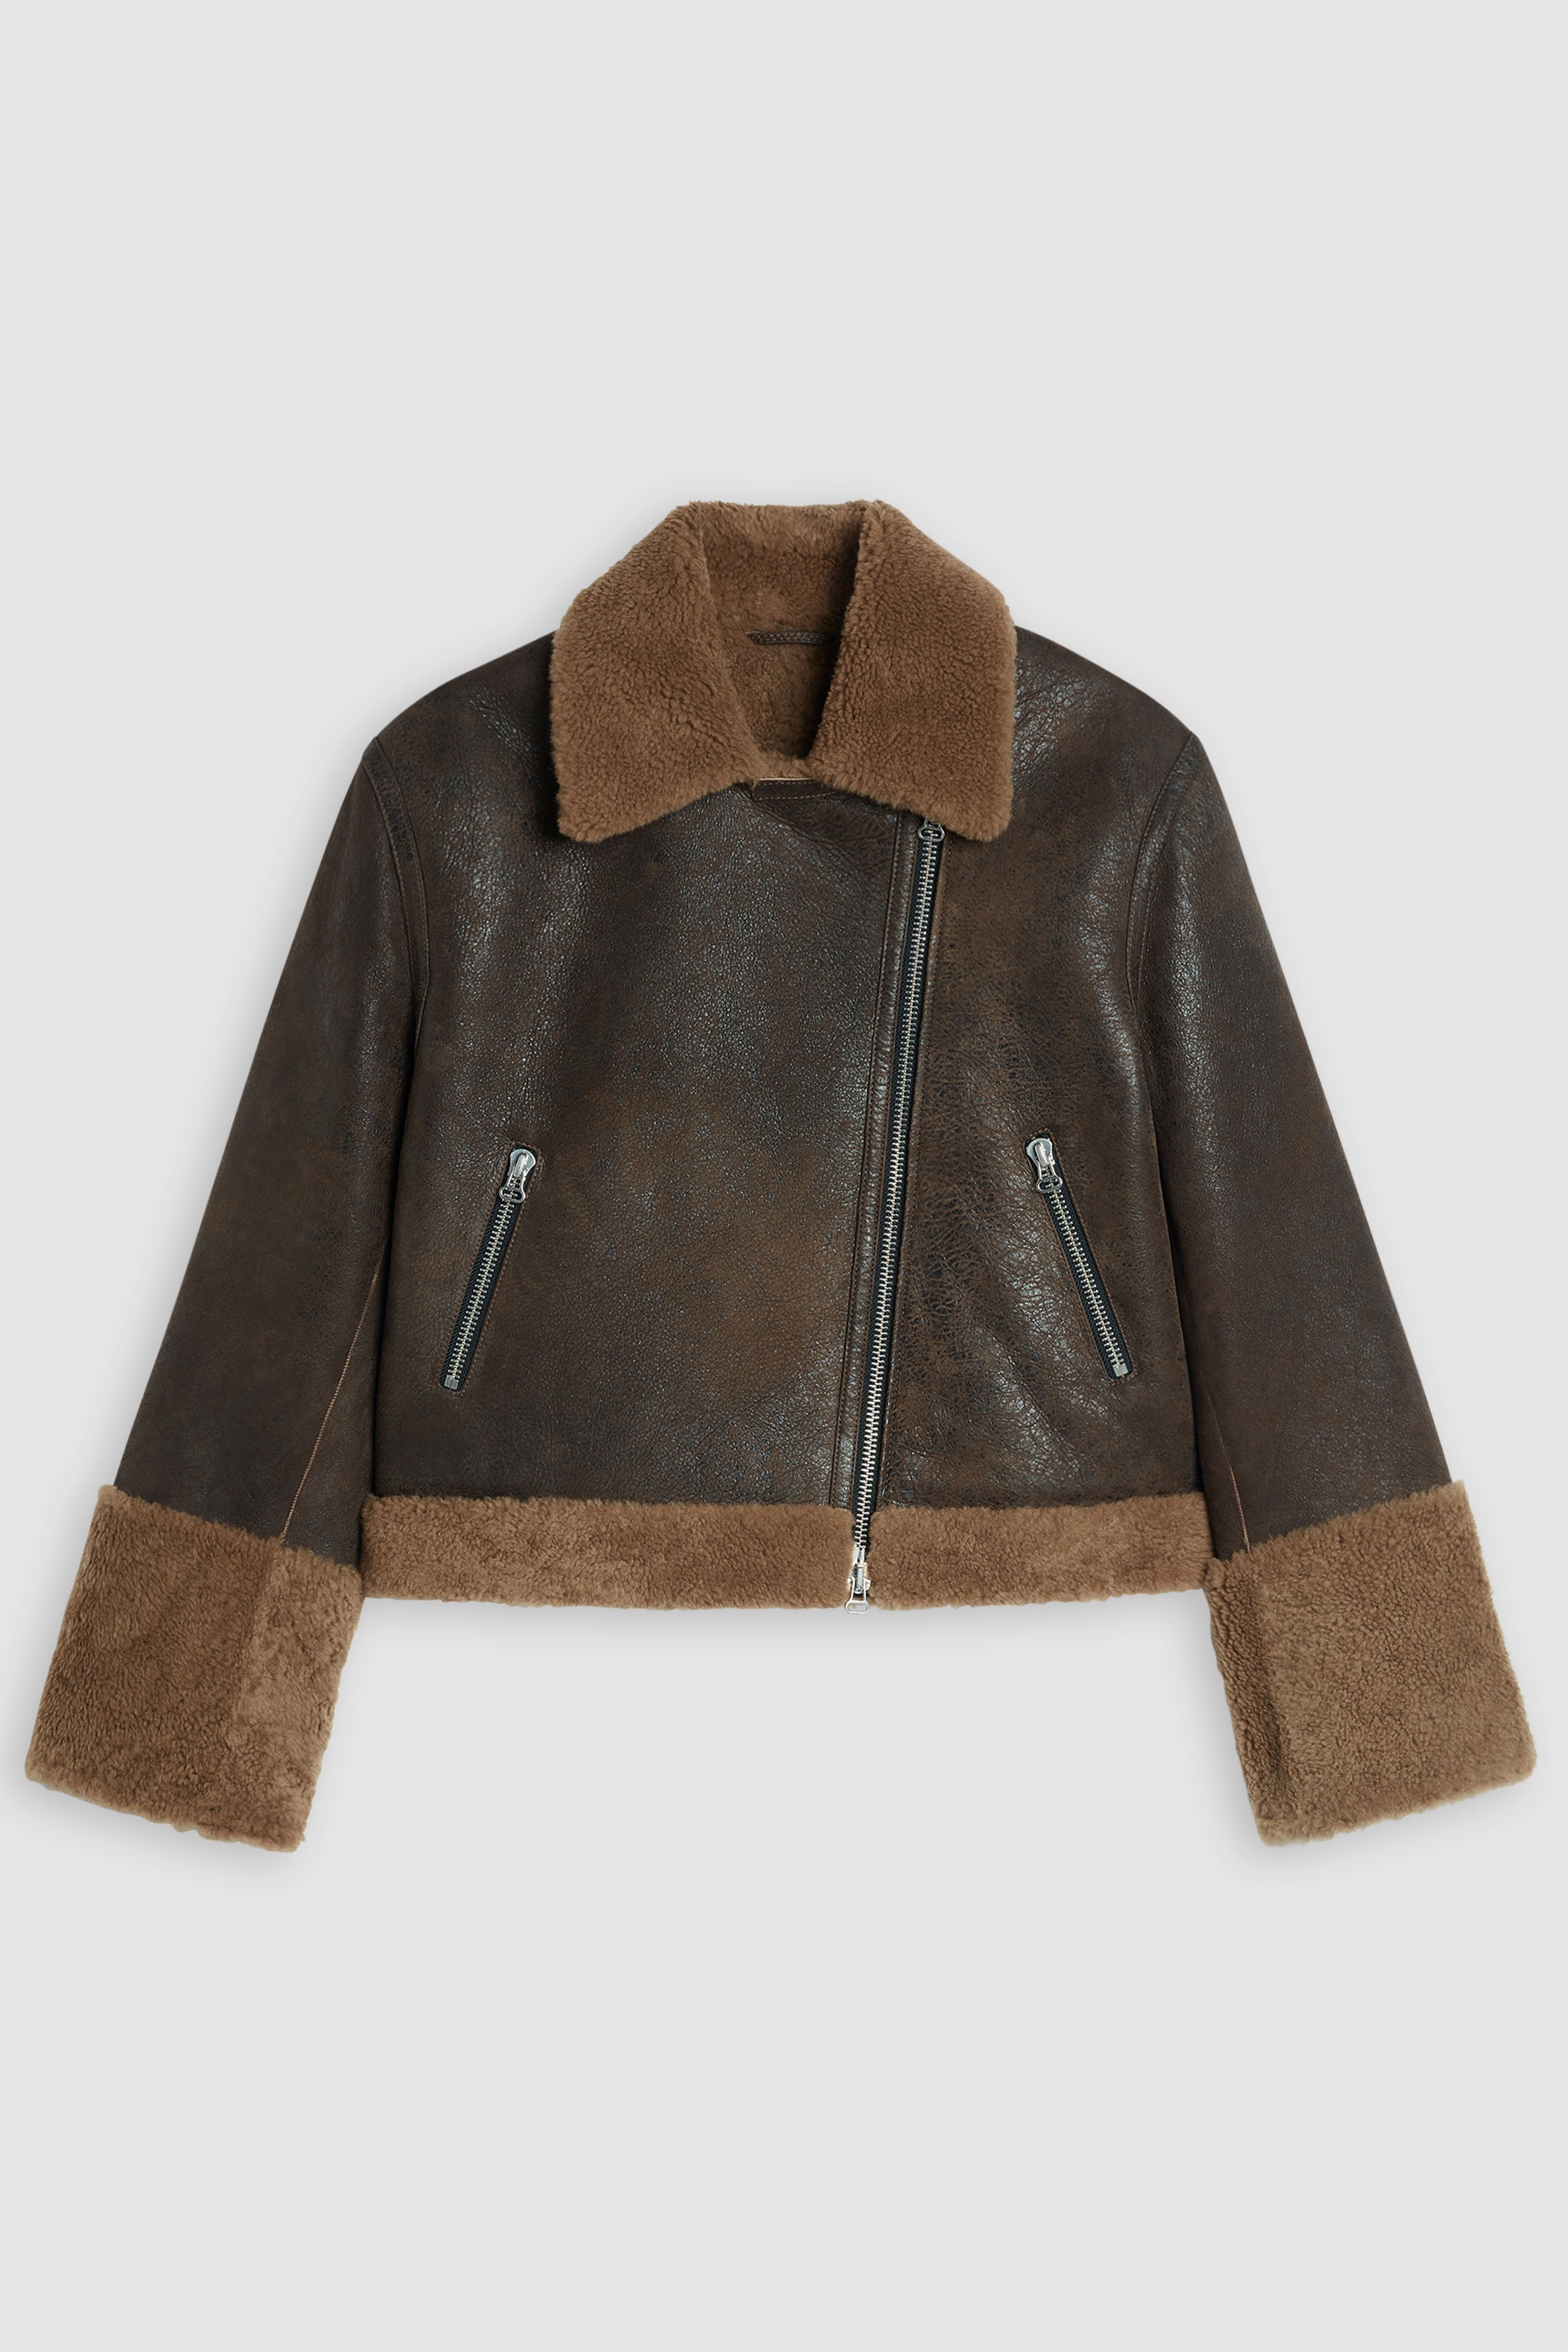 This stylish Biker jacket from Closed is crafted from premium Spanish shearling and tanned close to Barcelona. It features a leather exterior with a matt look and soft shearling interior for enhanced comfort. Other features include diagonal zip closure, zip pockets, and wide sleeve cuffs. Upgrade your wardrobe with this luxurious, timeless design.